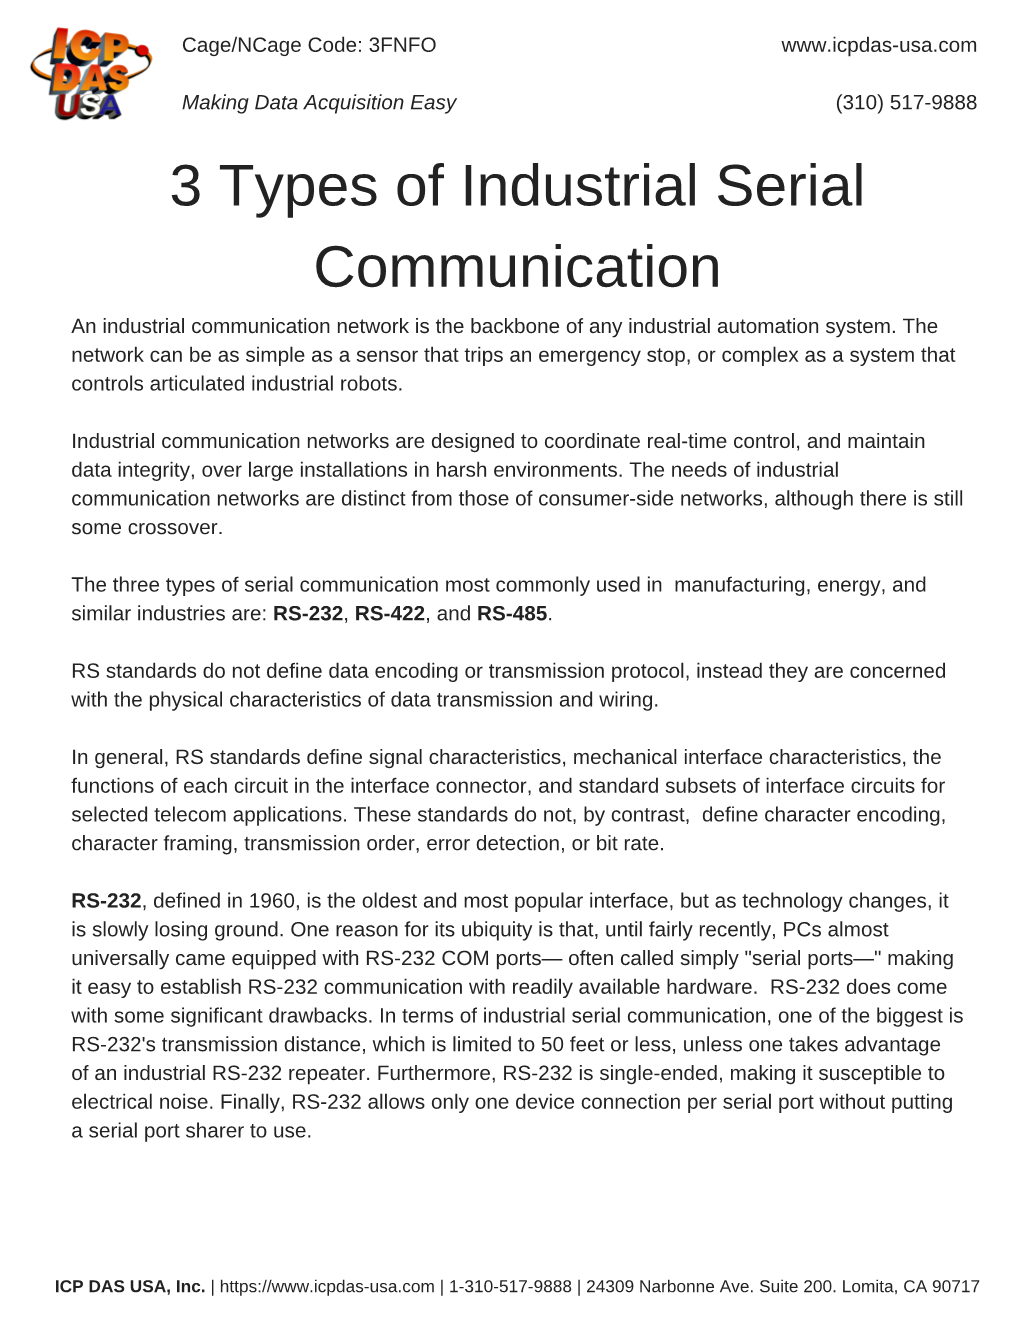 3 Types of Industrial Serial Communication an Industrial Communication Network Is the Backbone of Any Industrial Automation System